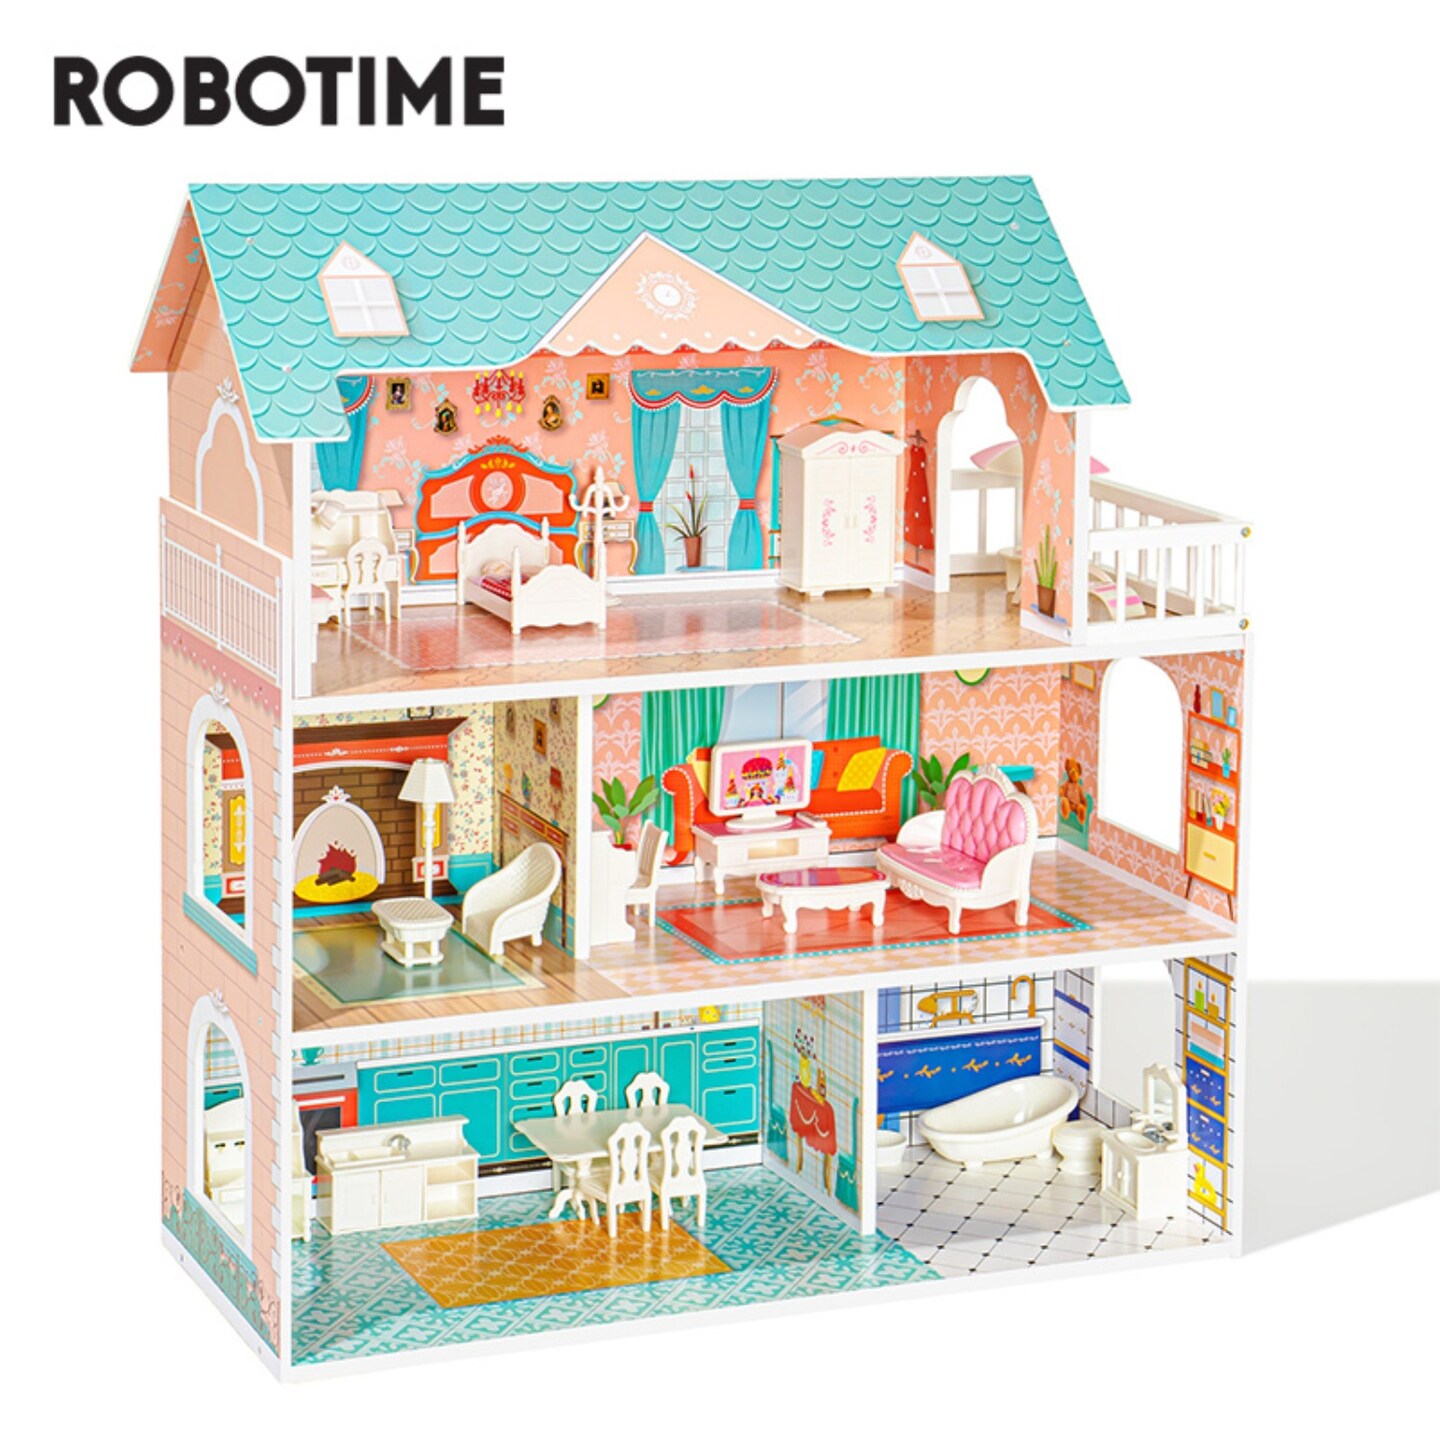 Robotime Big Wooden Dollhouse with Furniture - WDH01 Play Set Gift for Kids, Girls - Blue